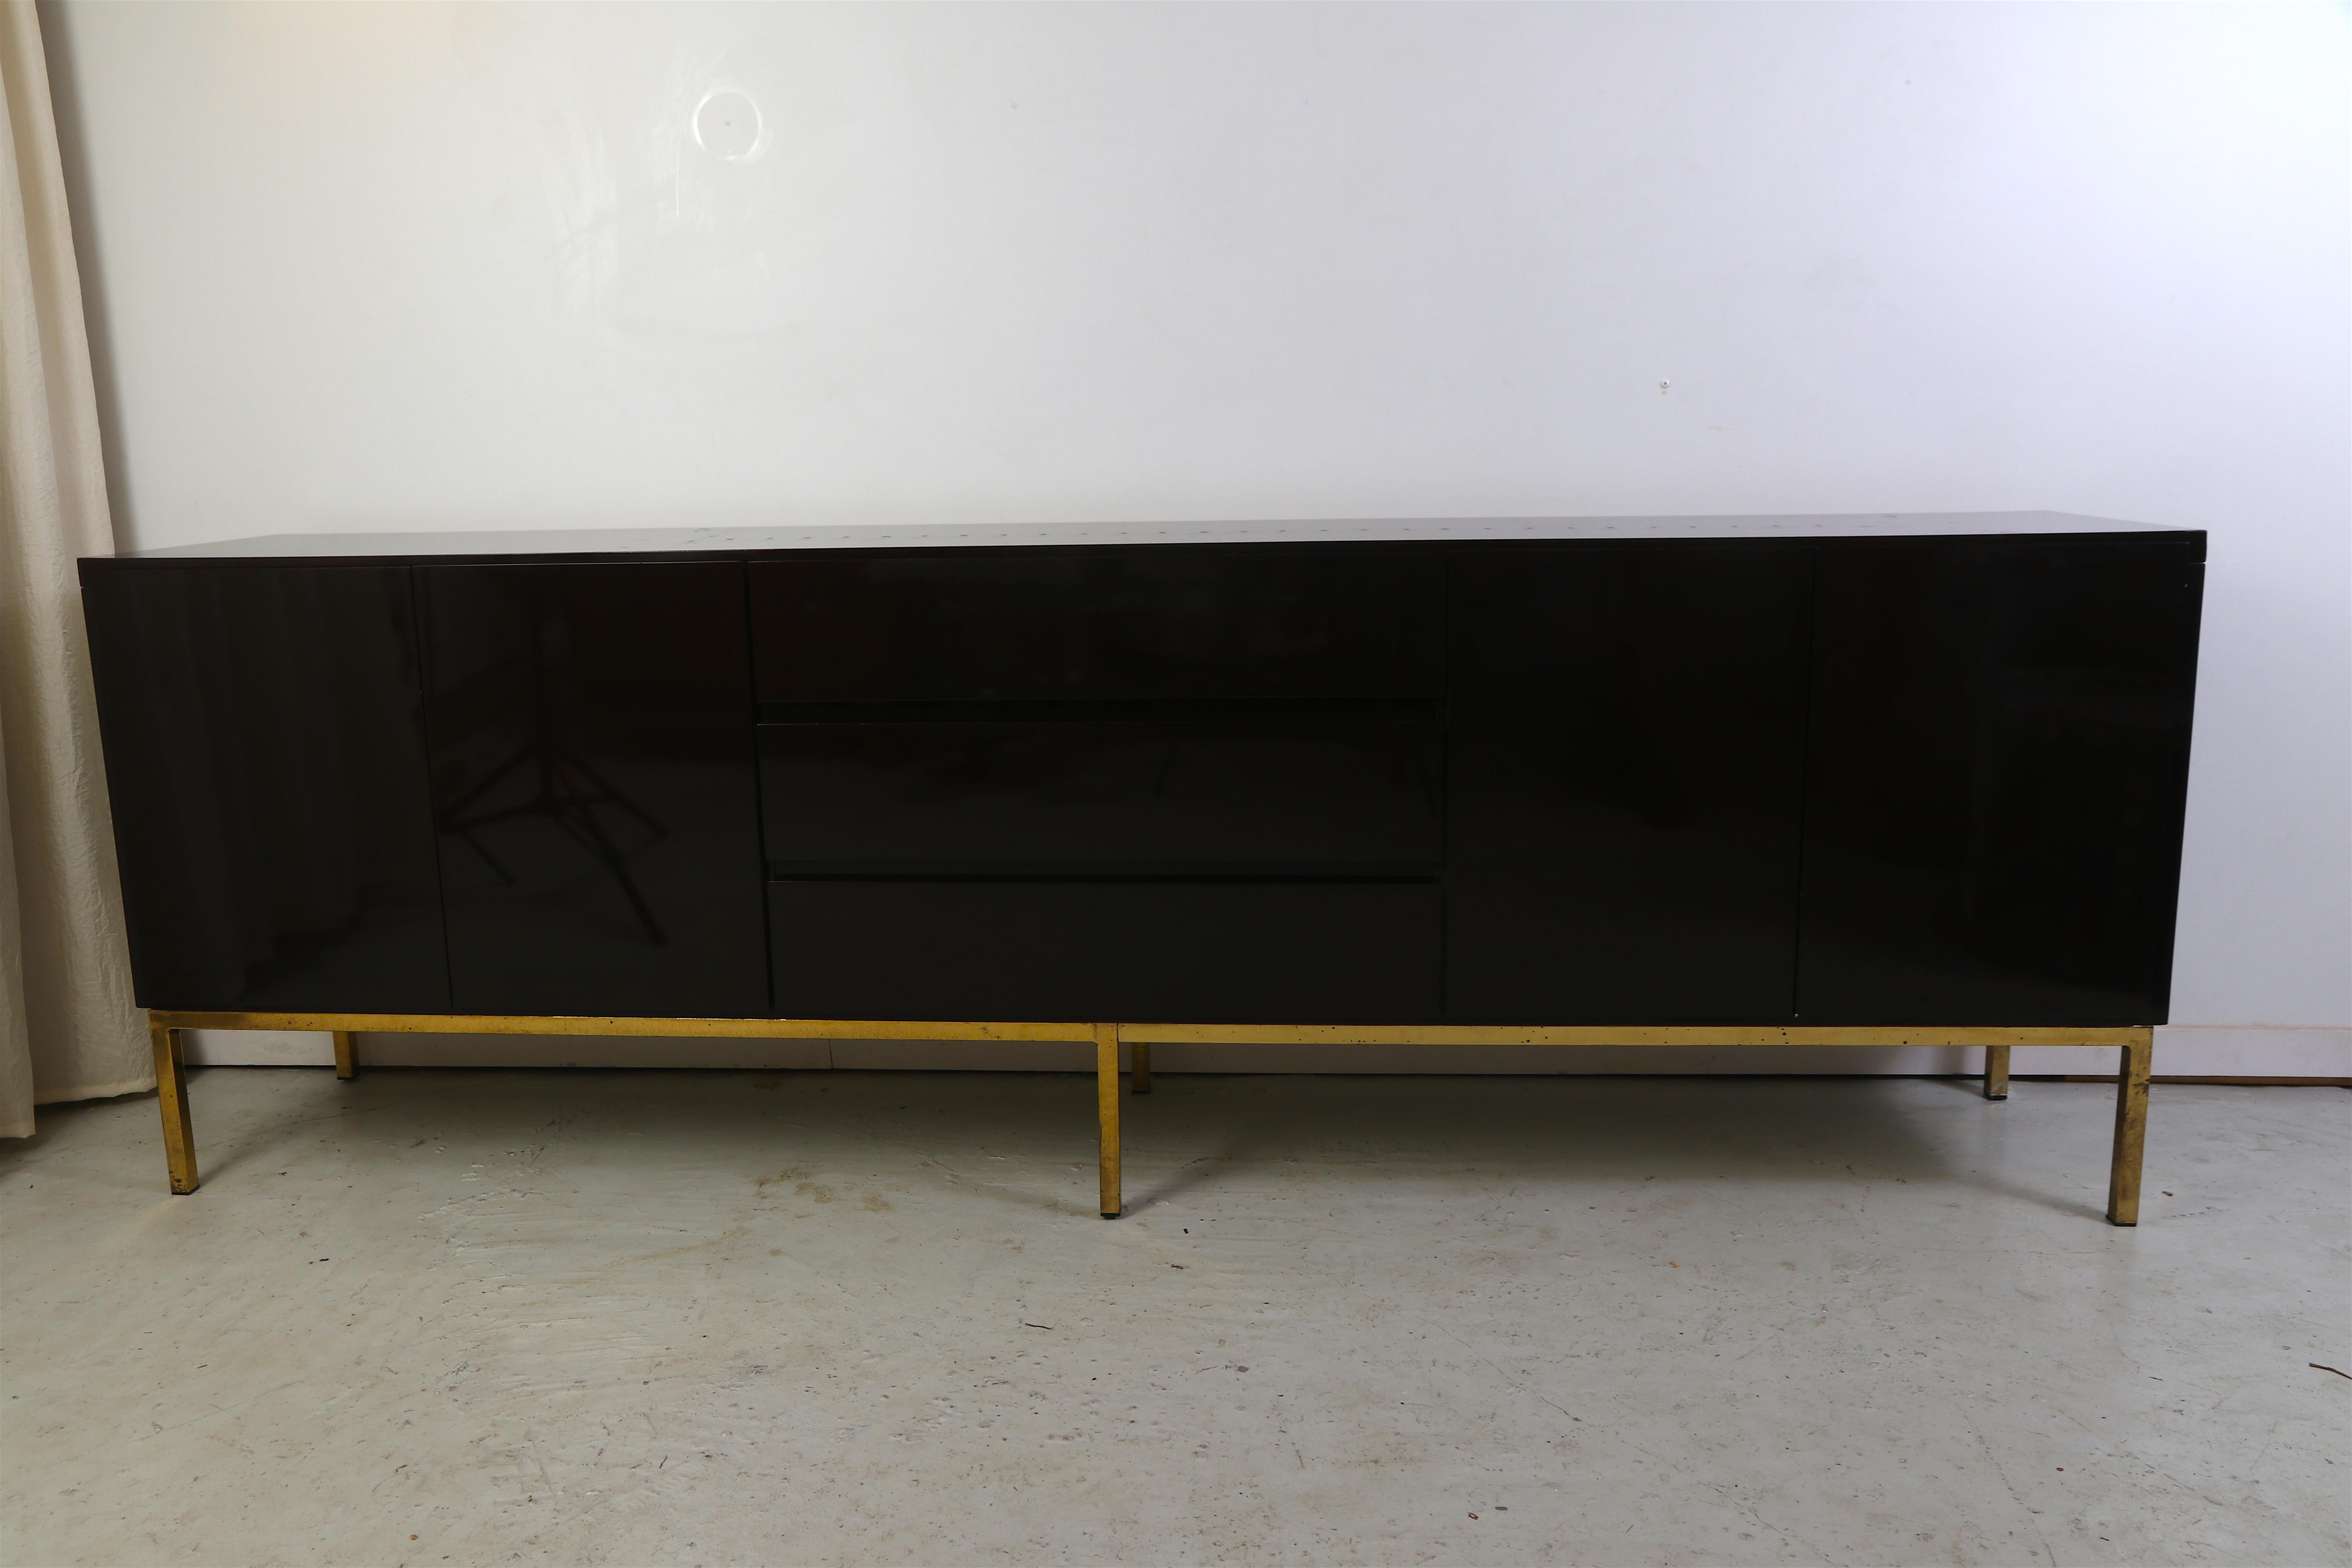 Absolutely stunning large sideboard in the style of Maison Jansen, produced by Roche Bobois in the 1970s and designed by Jean-Claude Mahey. It features a beautifully patinated copper base with six legs, two storage compartments and three drawers. It